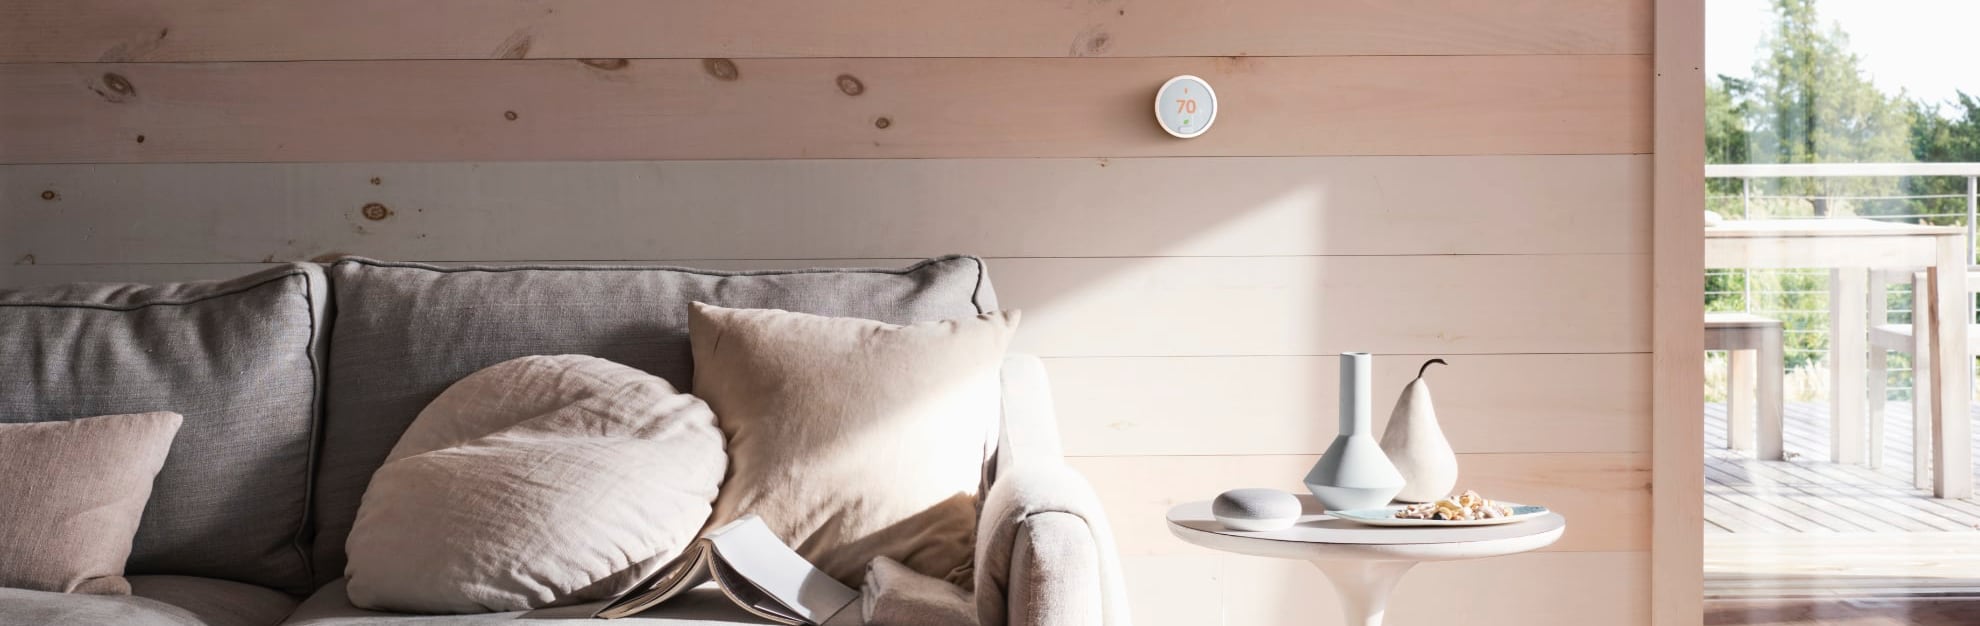 Vivint Home Automation in Ithaca